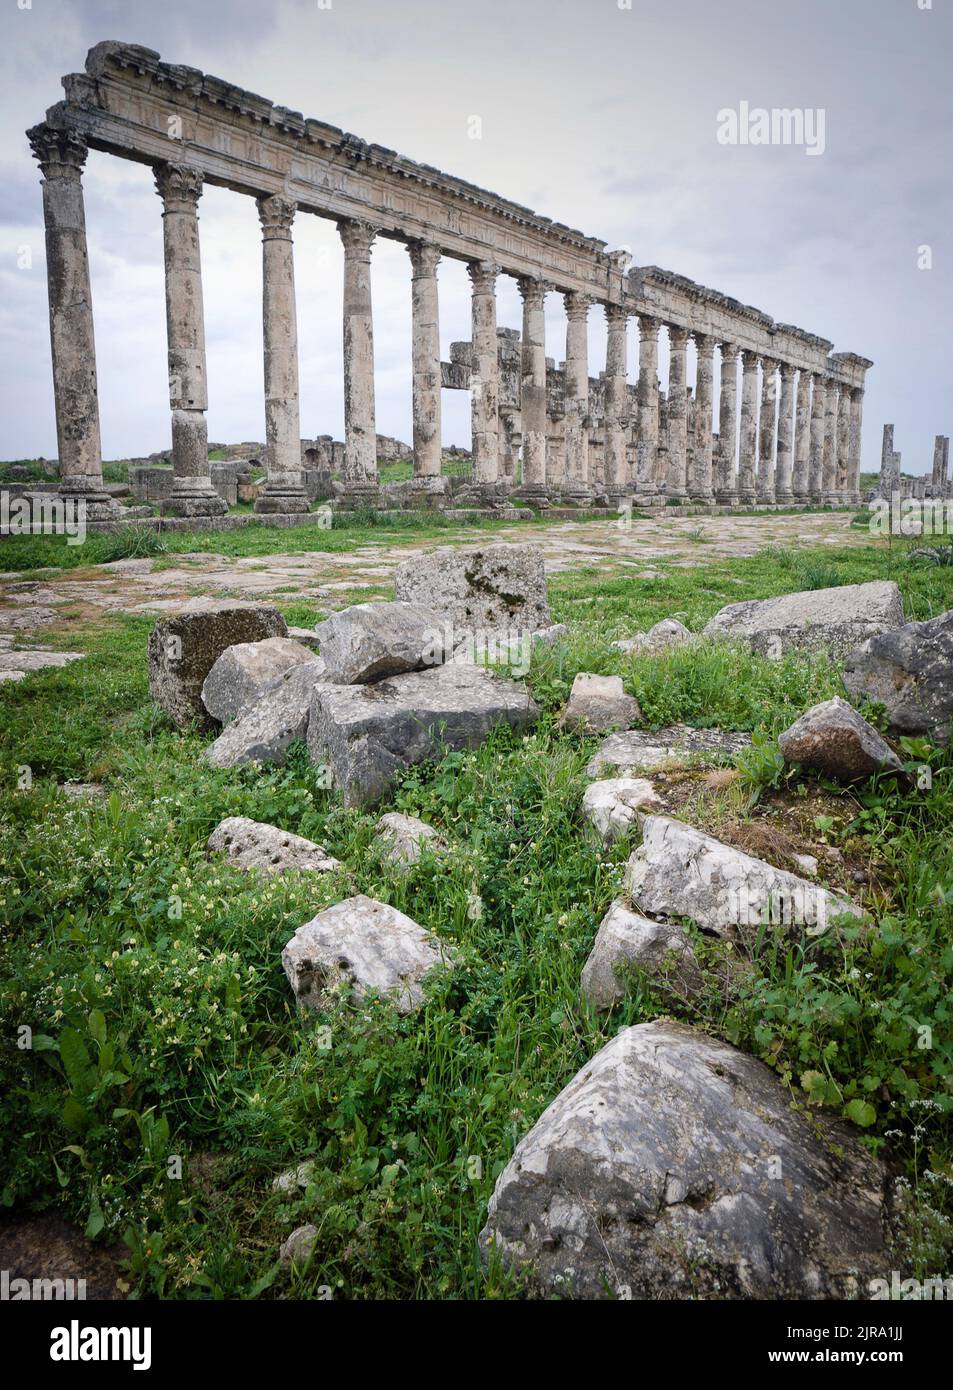 The Great Colonnade at Apamea ruins, Hama Governorate, Syria Stock Photo